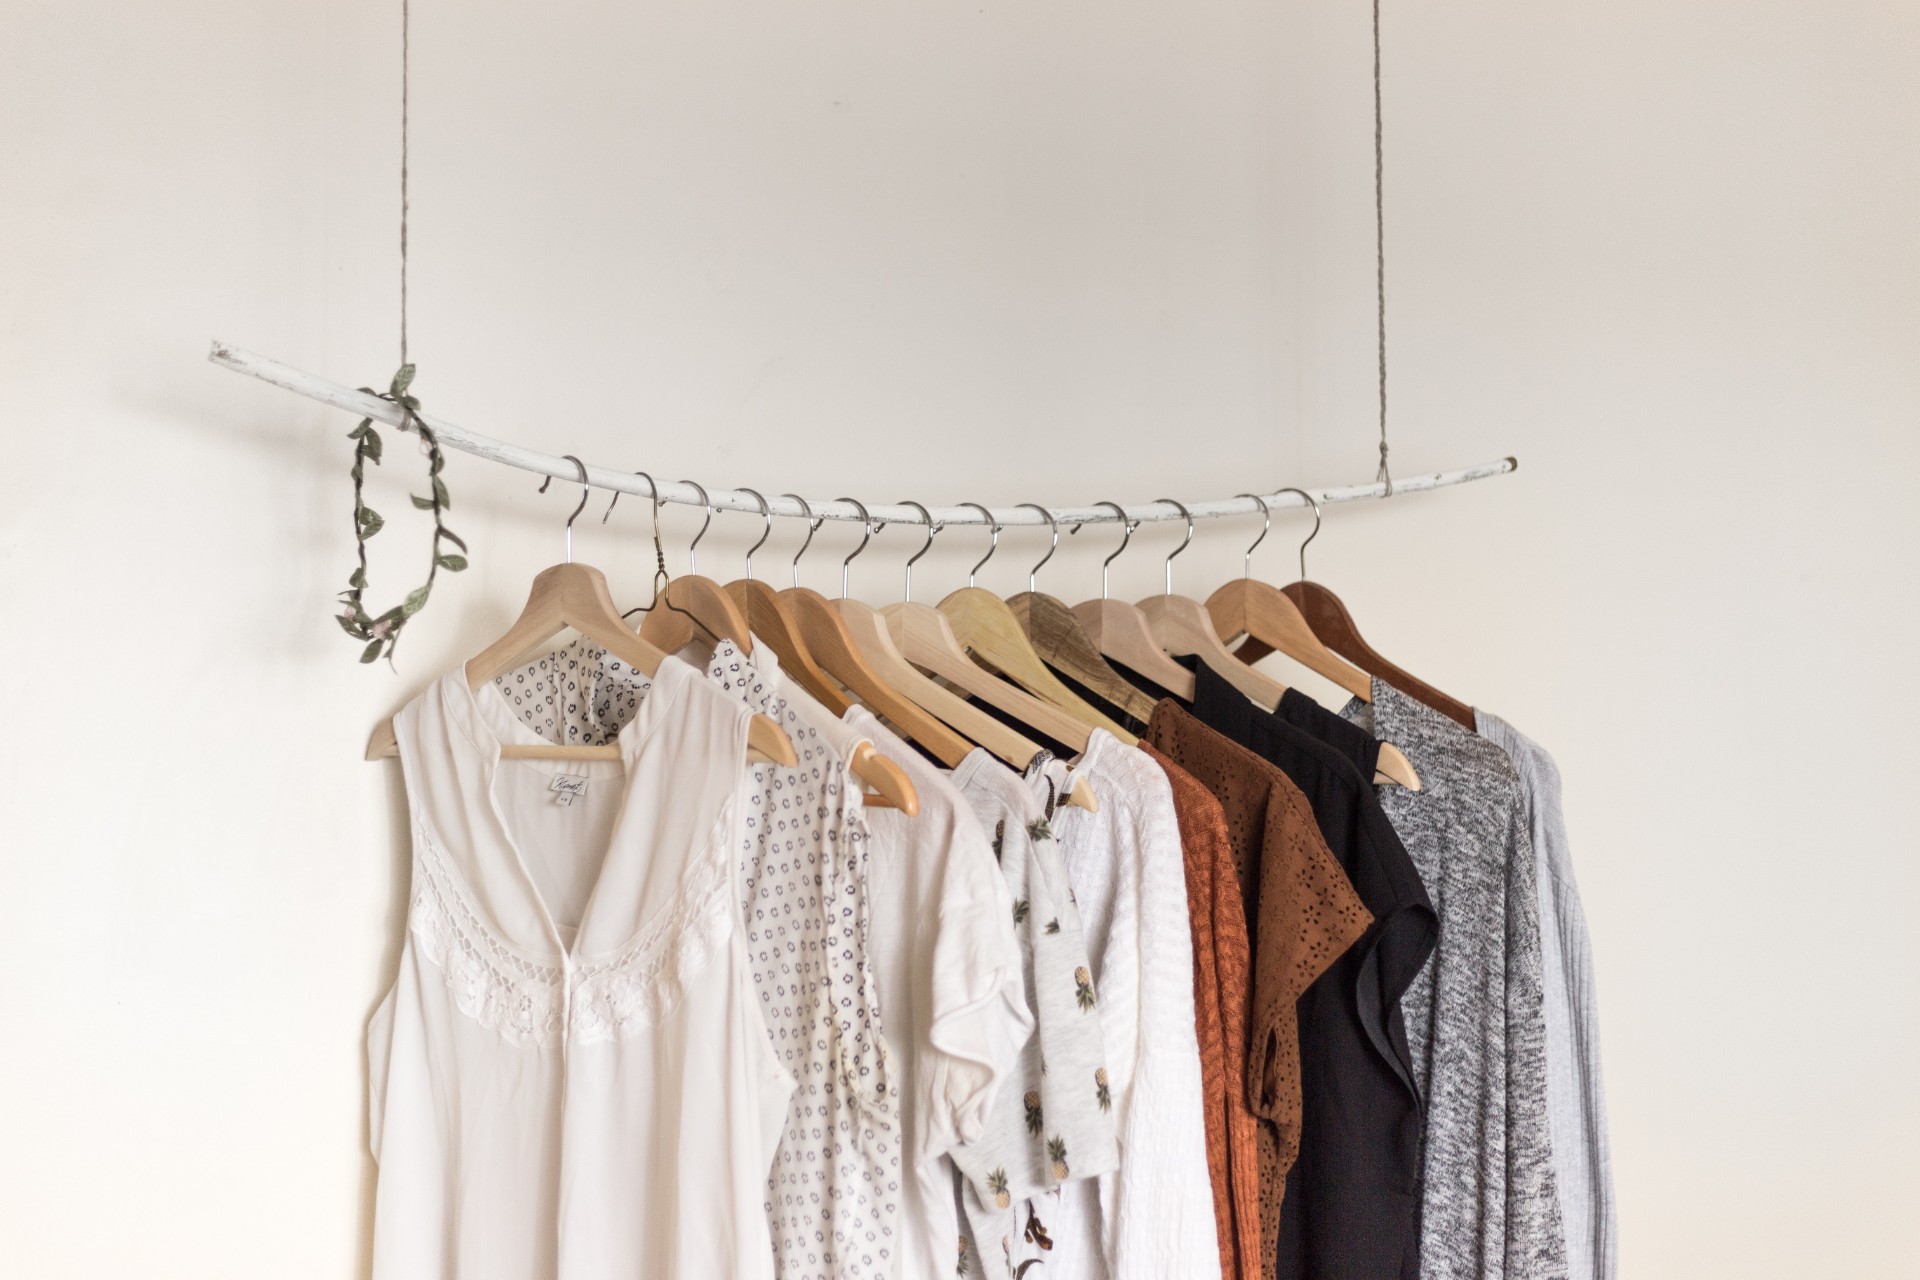 clothes-hanging-from-hanging-rail-from-ceiling-in-white-minimalist-room-travel-capsule-wardrobe